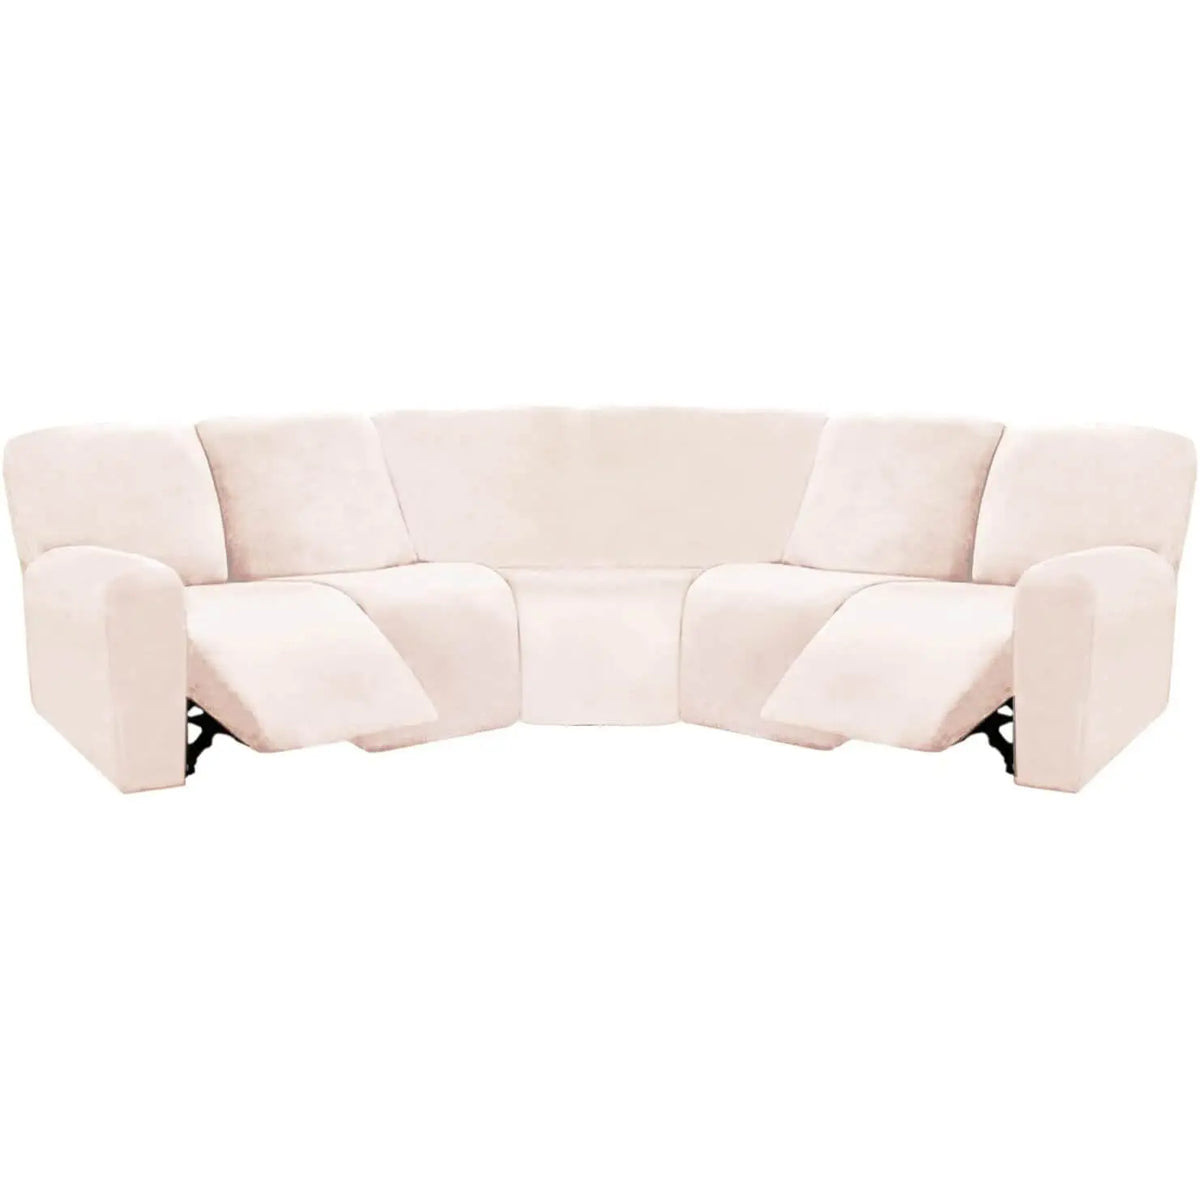 Crfatop 5-seater L Shape Sofa Cover with Recliner Beige